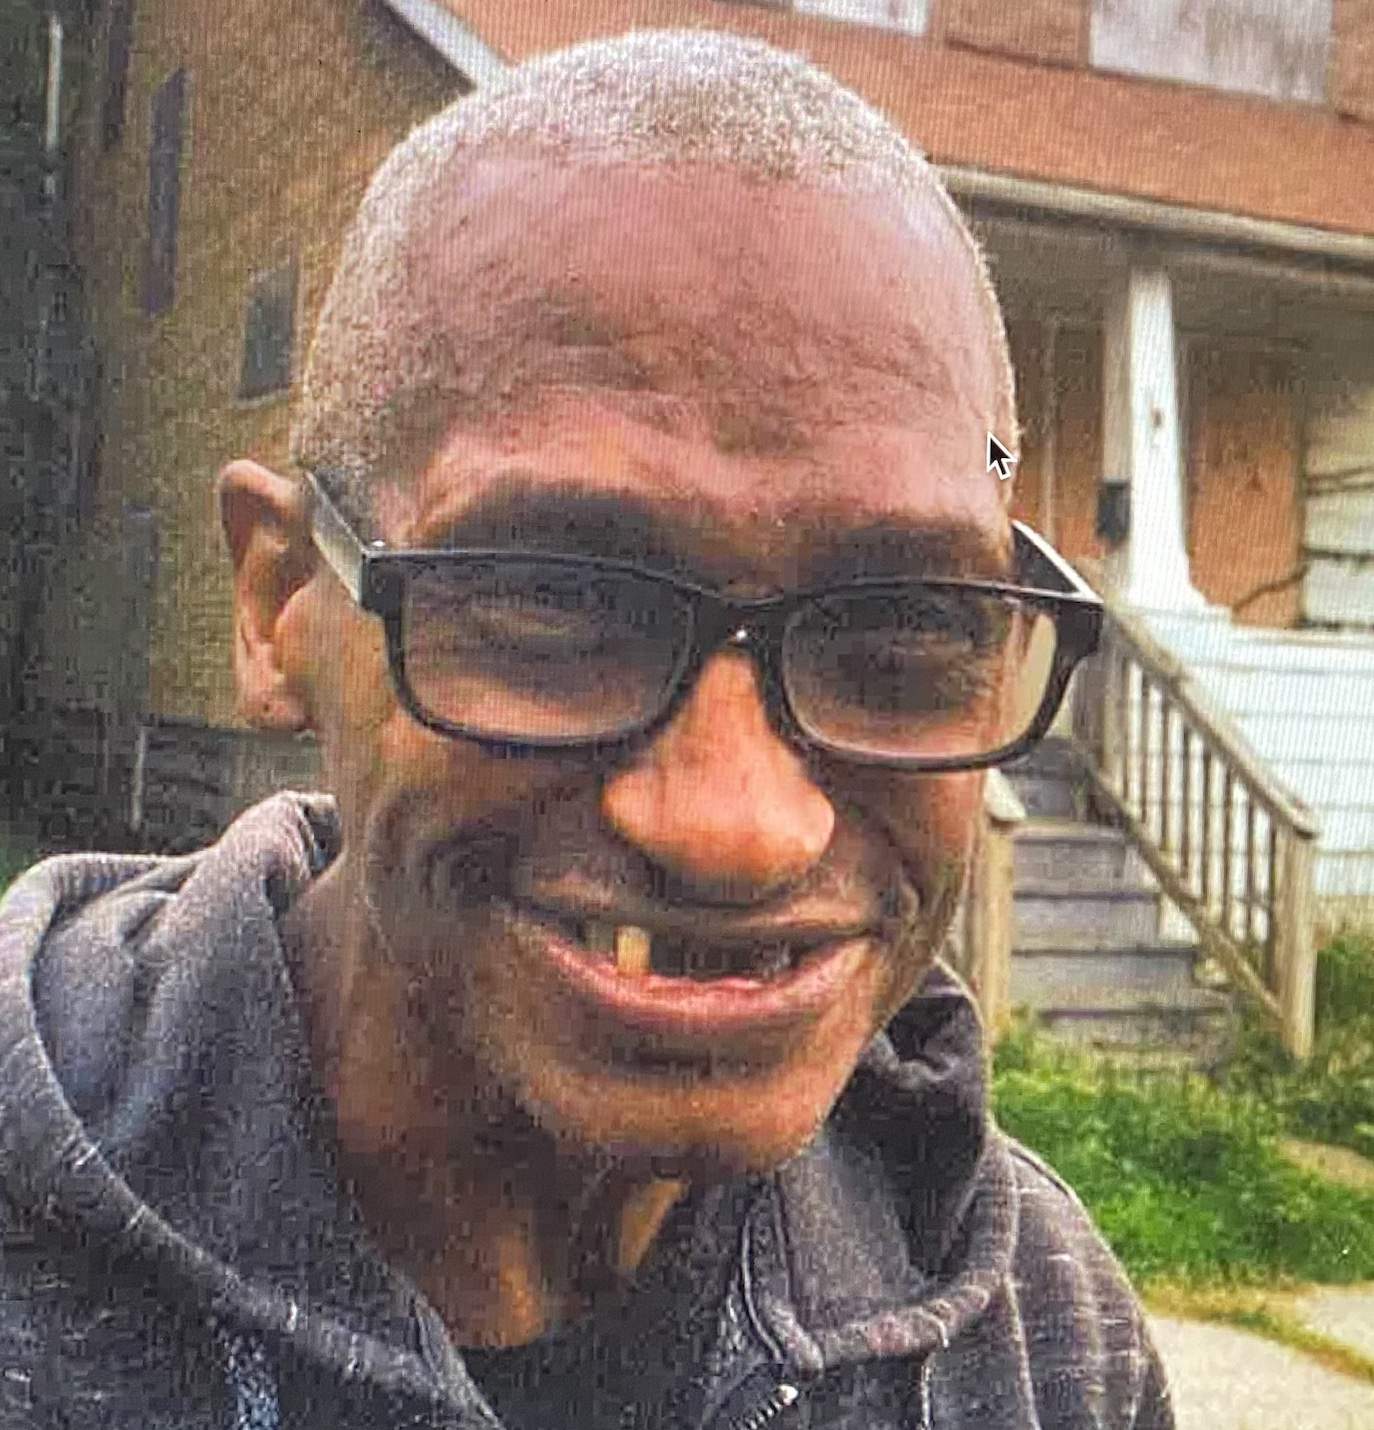 Detroit police seek 64-year-old missing for a month